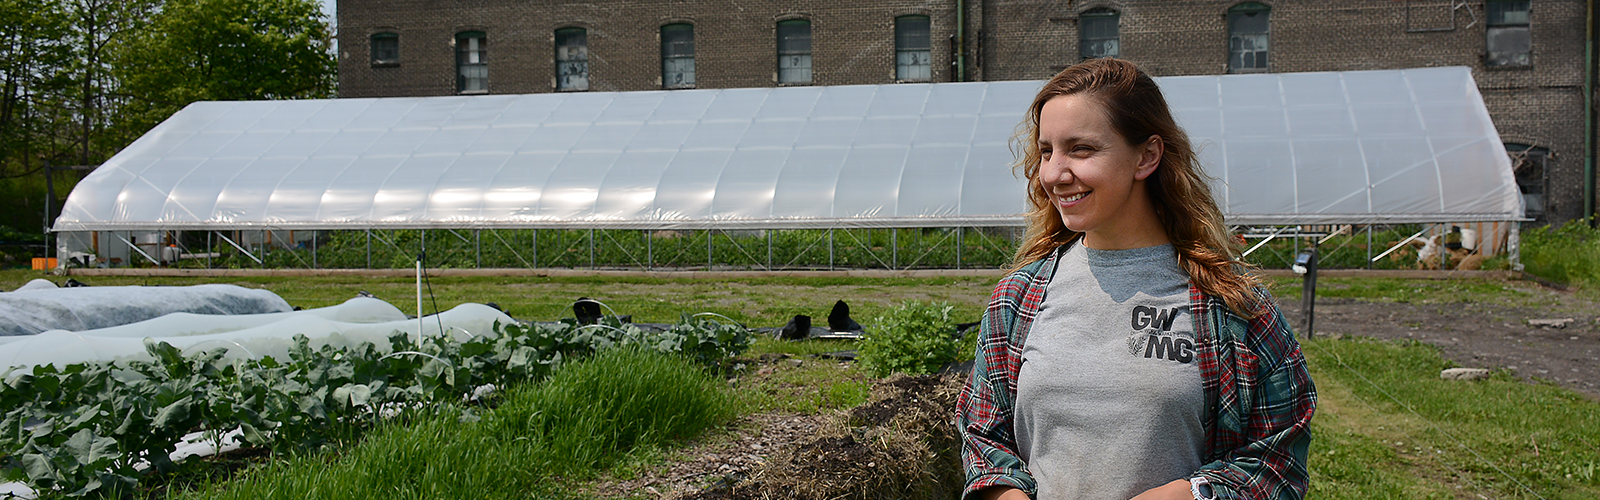 Groundwork Market Garden co-owner Mayda Pozantides stands in a field of freshly planted crops at 1698 Genesee St., in Buffalo.